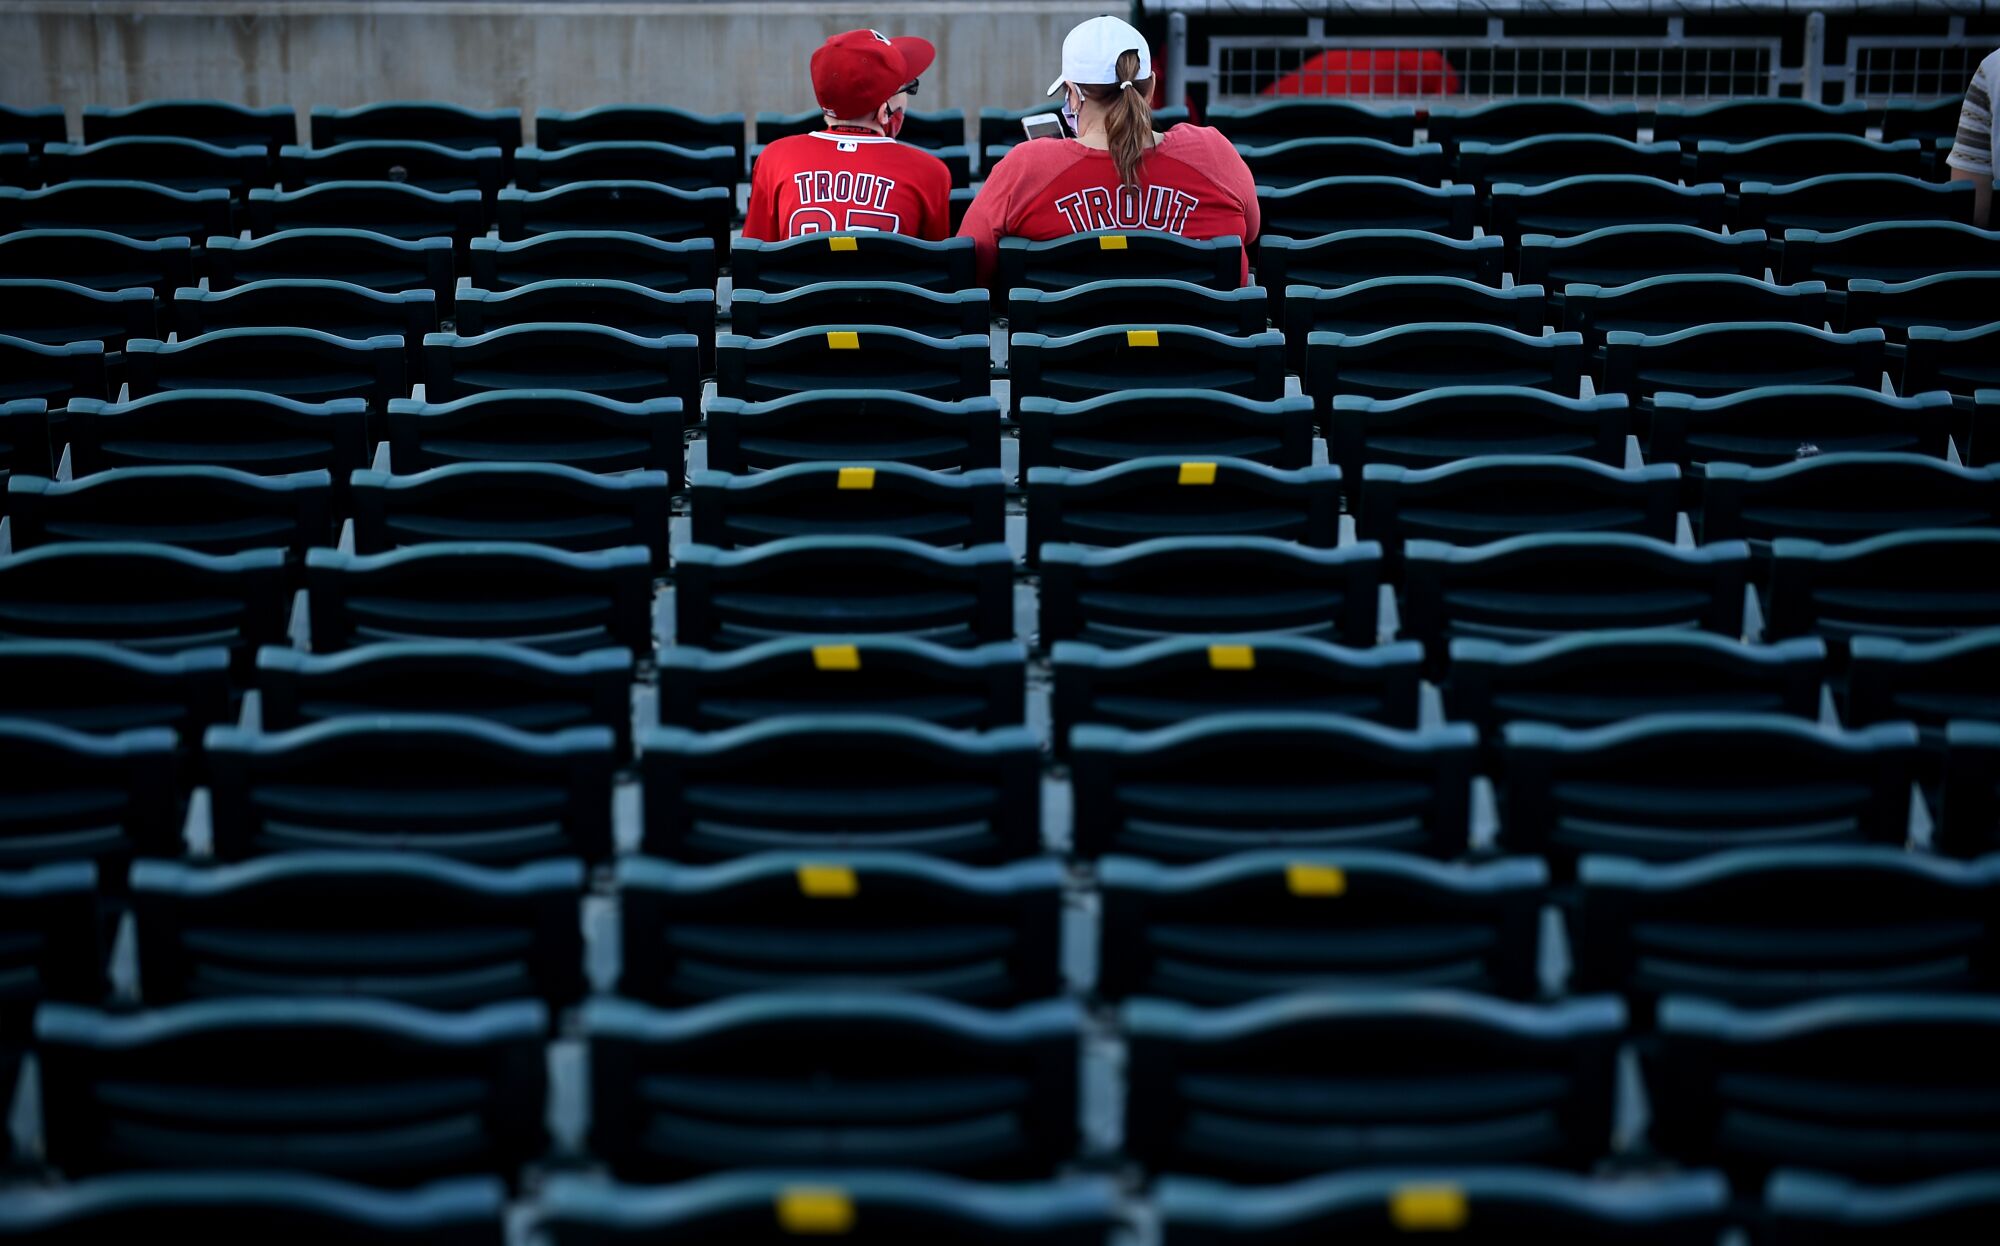 Angels fans watch warmups Tuesday before a game against the Reds at spring training in Goodyear, Ariz.